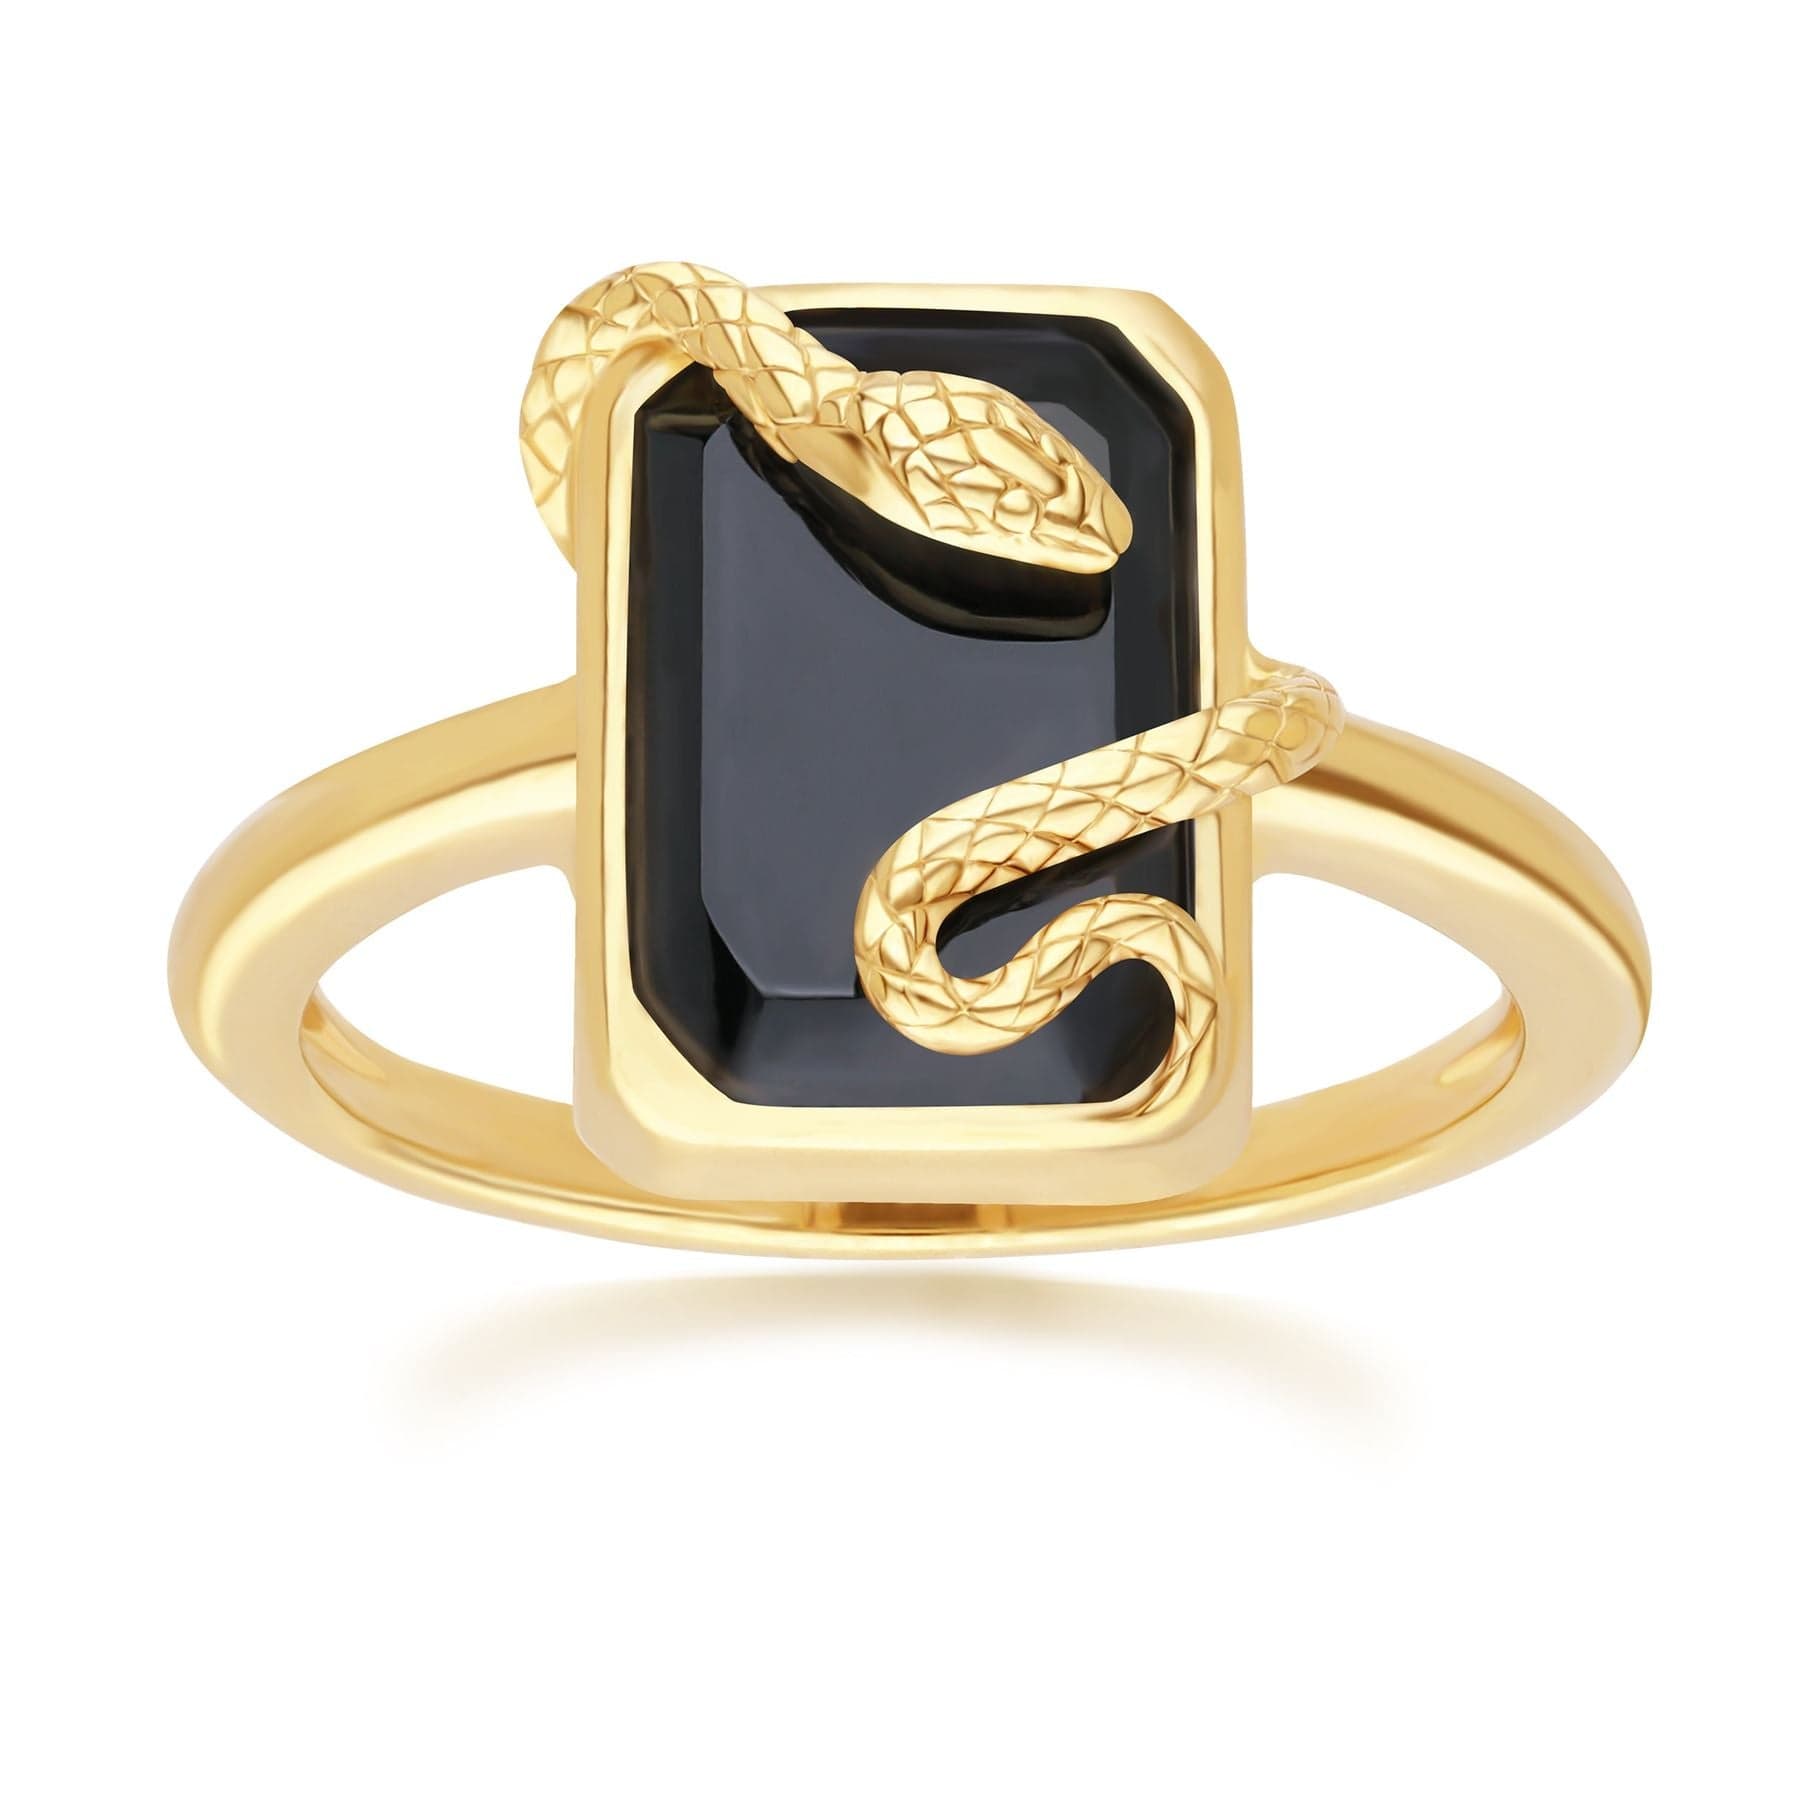 Grand Deco Black Onyx Snake Wrap Ring in Gold Plated Sterling Silver - Gemondo